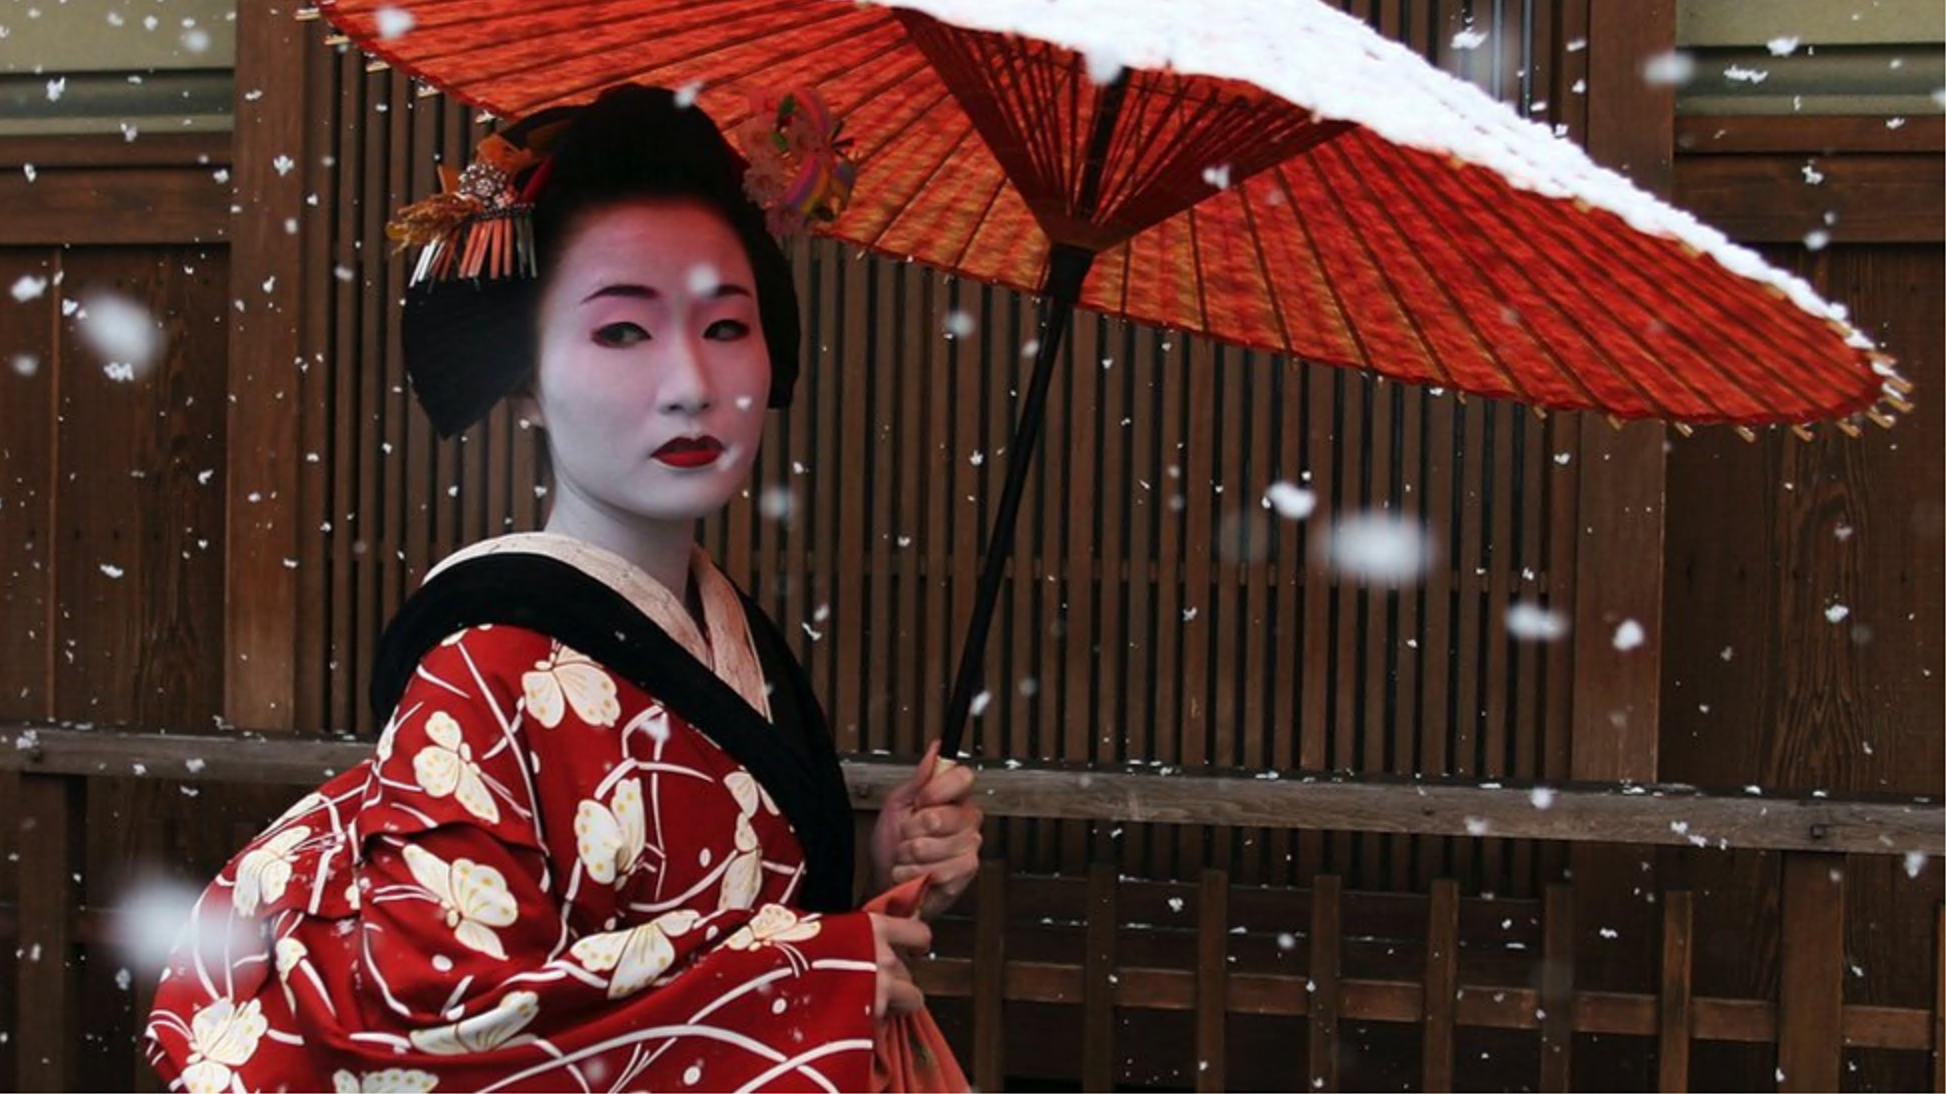 A Maiko, a traditional Japanese dancer, walks in the snow in Gion, Kyoto's famous geisha district, January 7, 2006 in Kyoto, Japan.